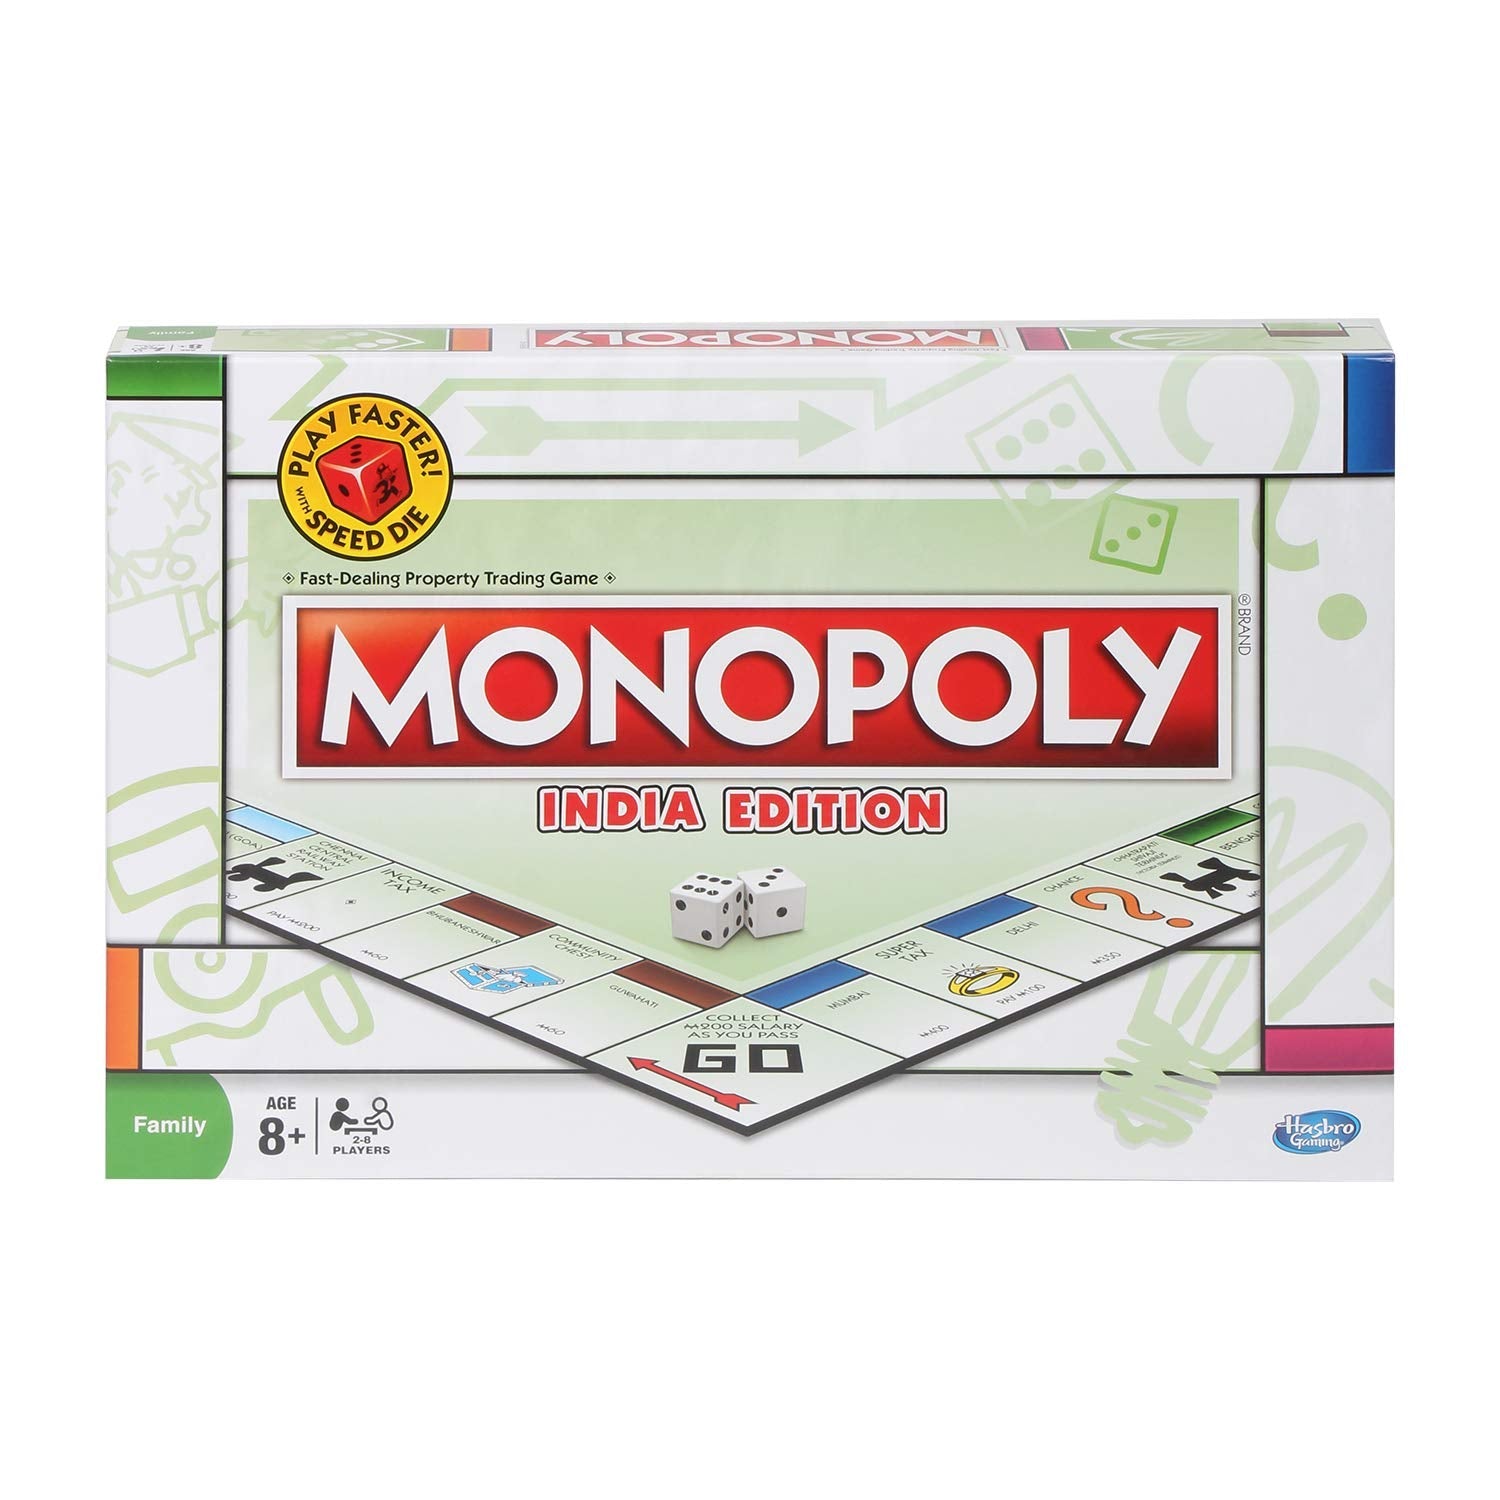 Monopoly Edition Game of Property, Strategy, and Indian Traditions